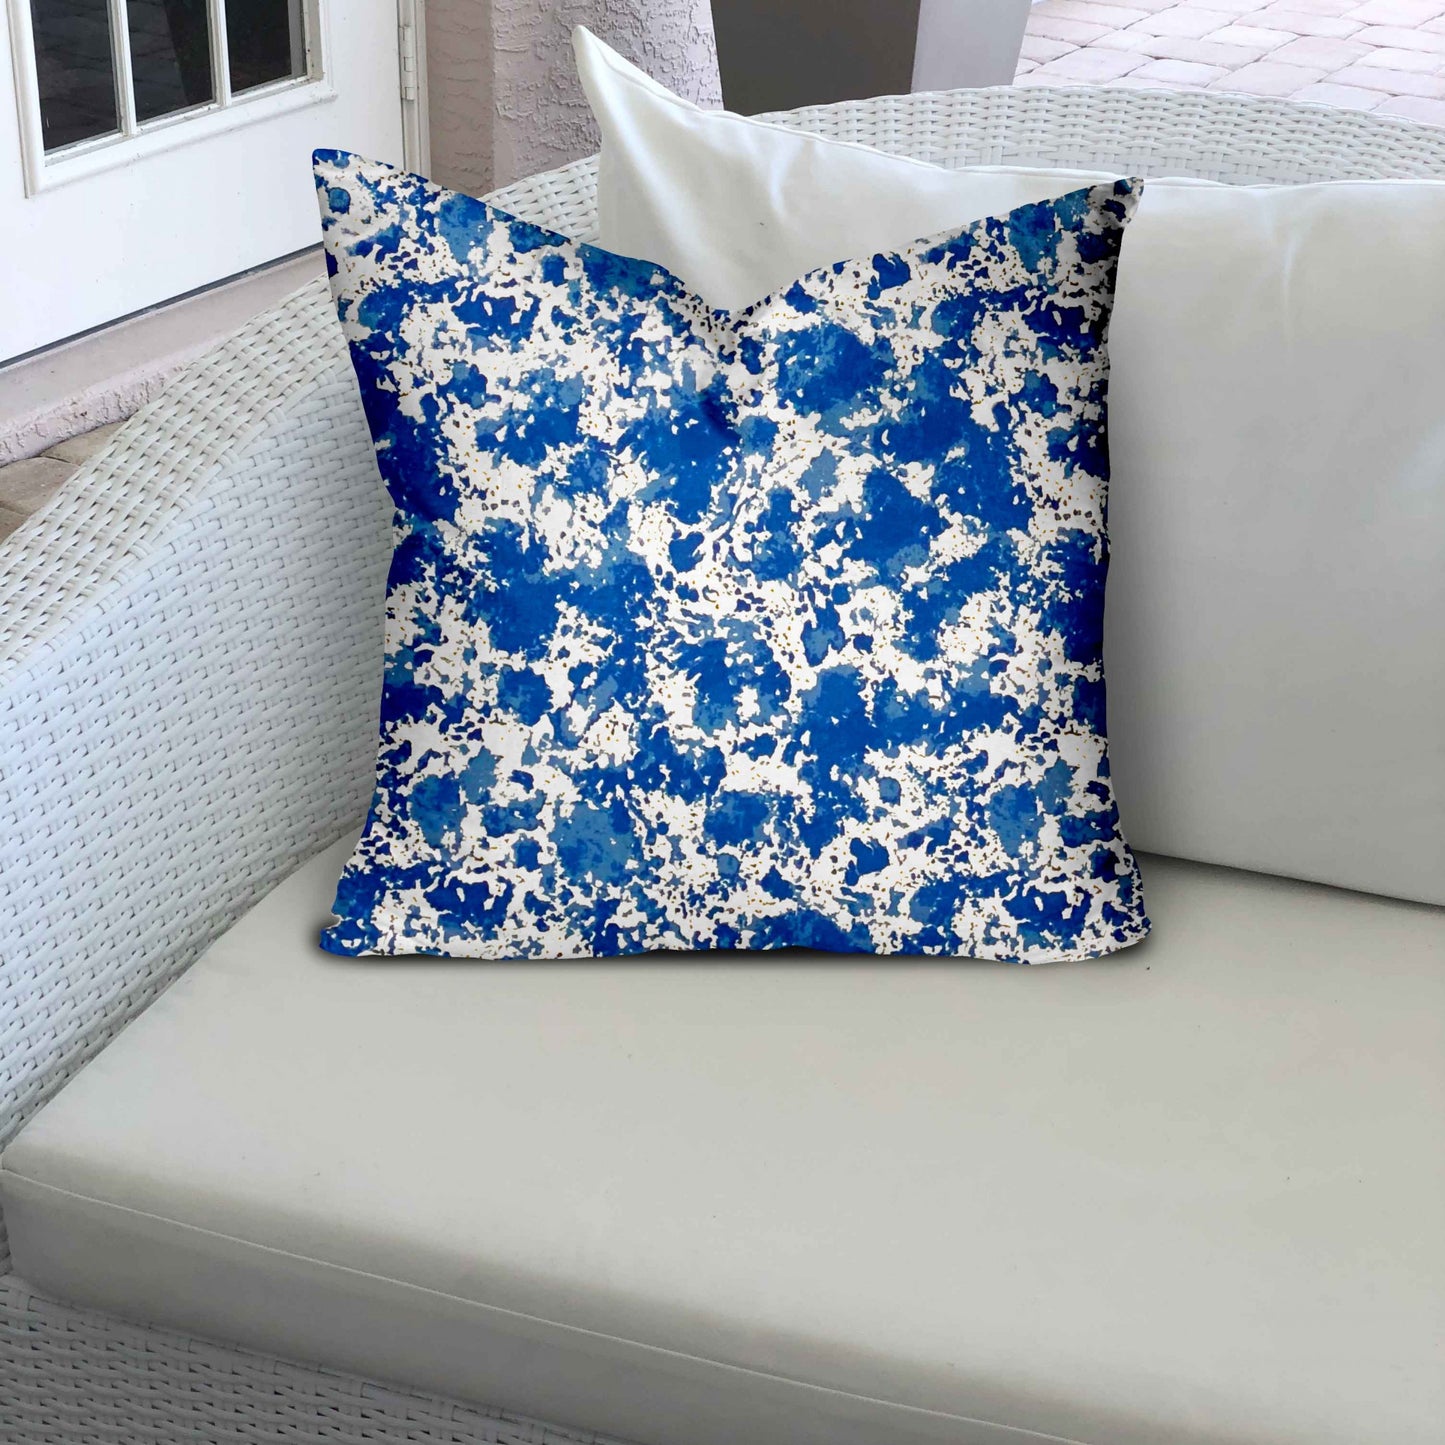 18" X 18" Blue And White Zippered Coastal Throw Indoor Outdoor Pillow Cover